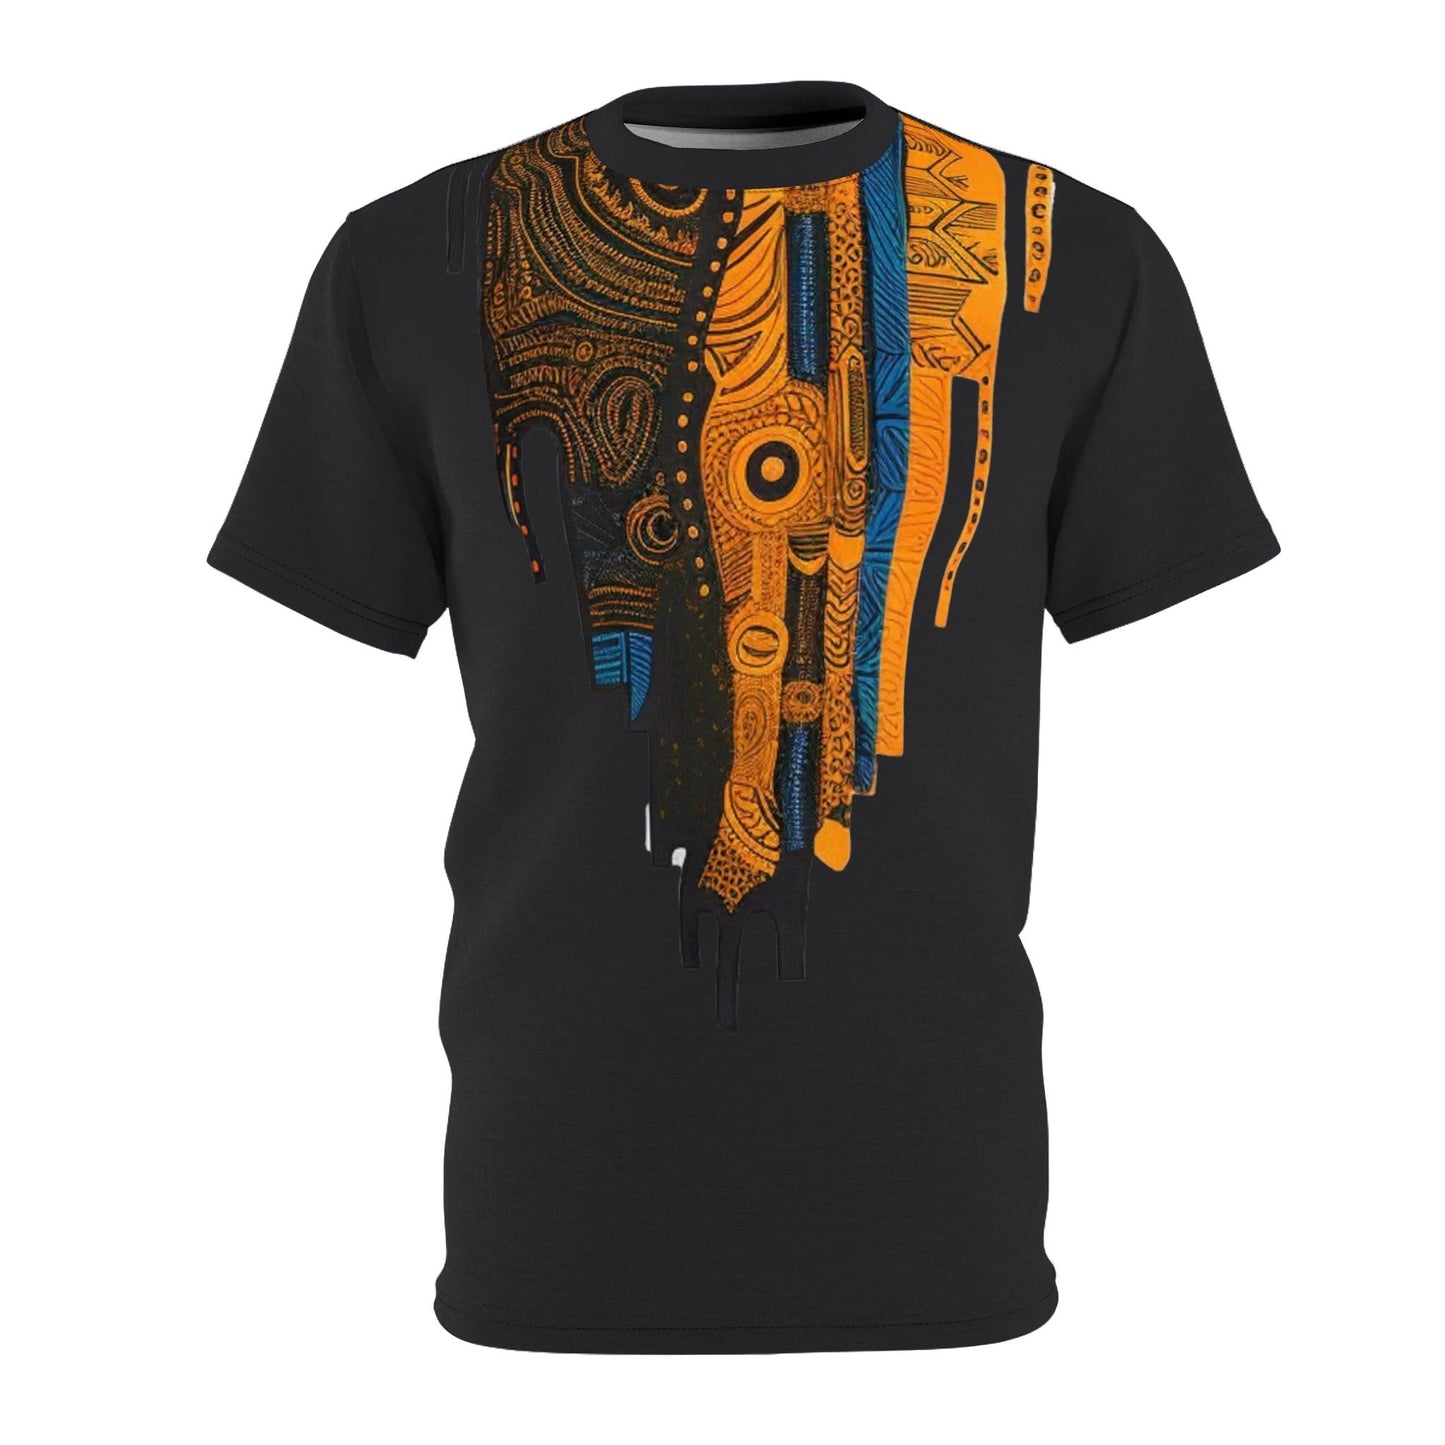 MotherLand Art Collection : Rain of the Art - Black Edition inspired T-shirt